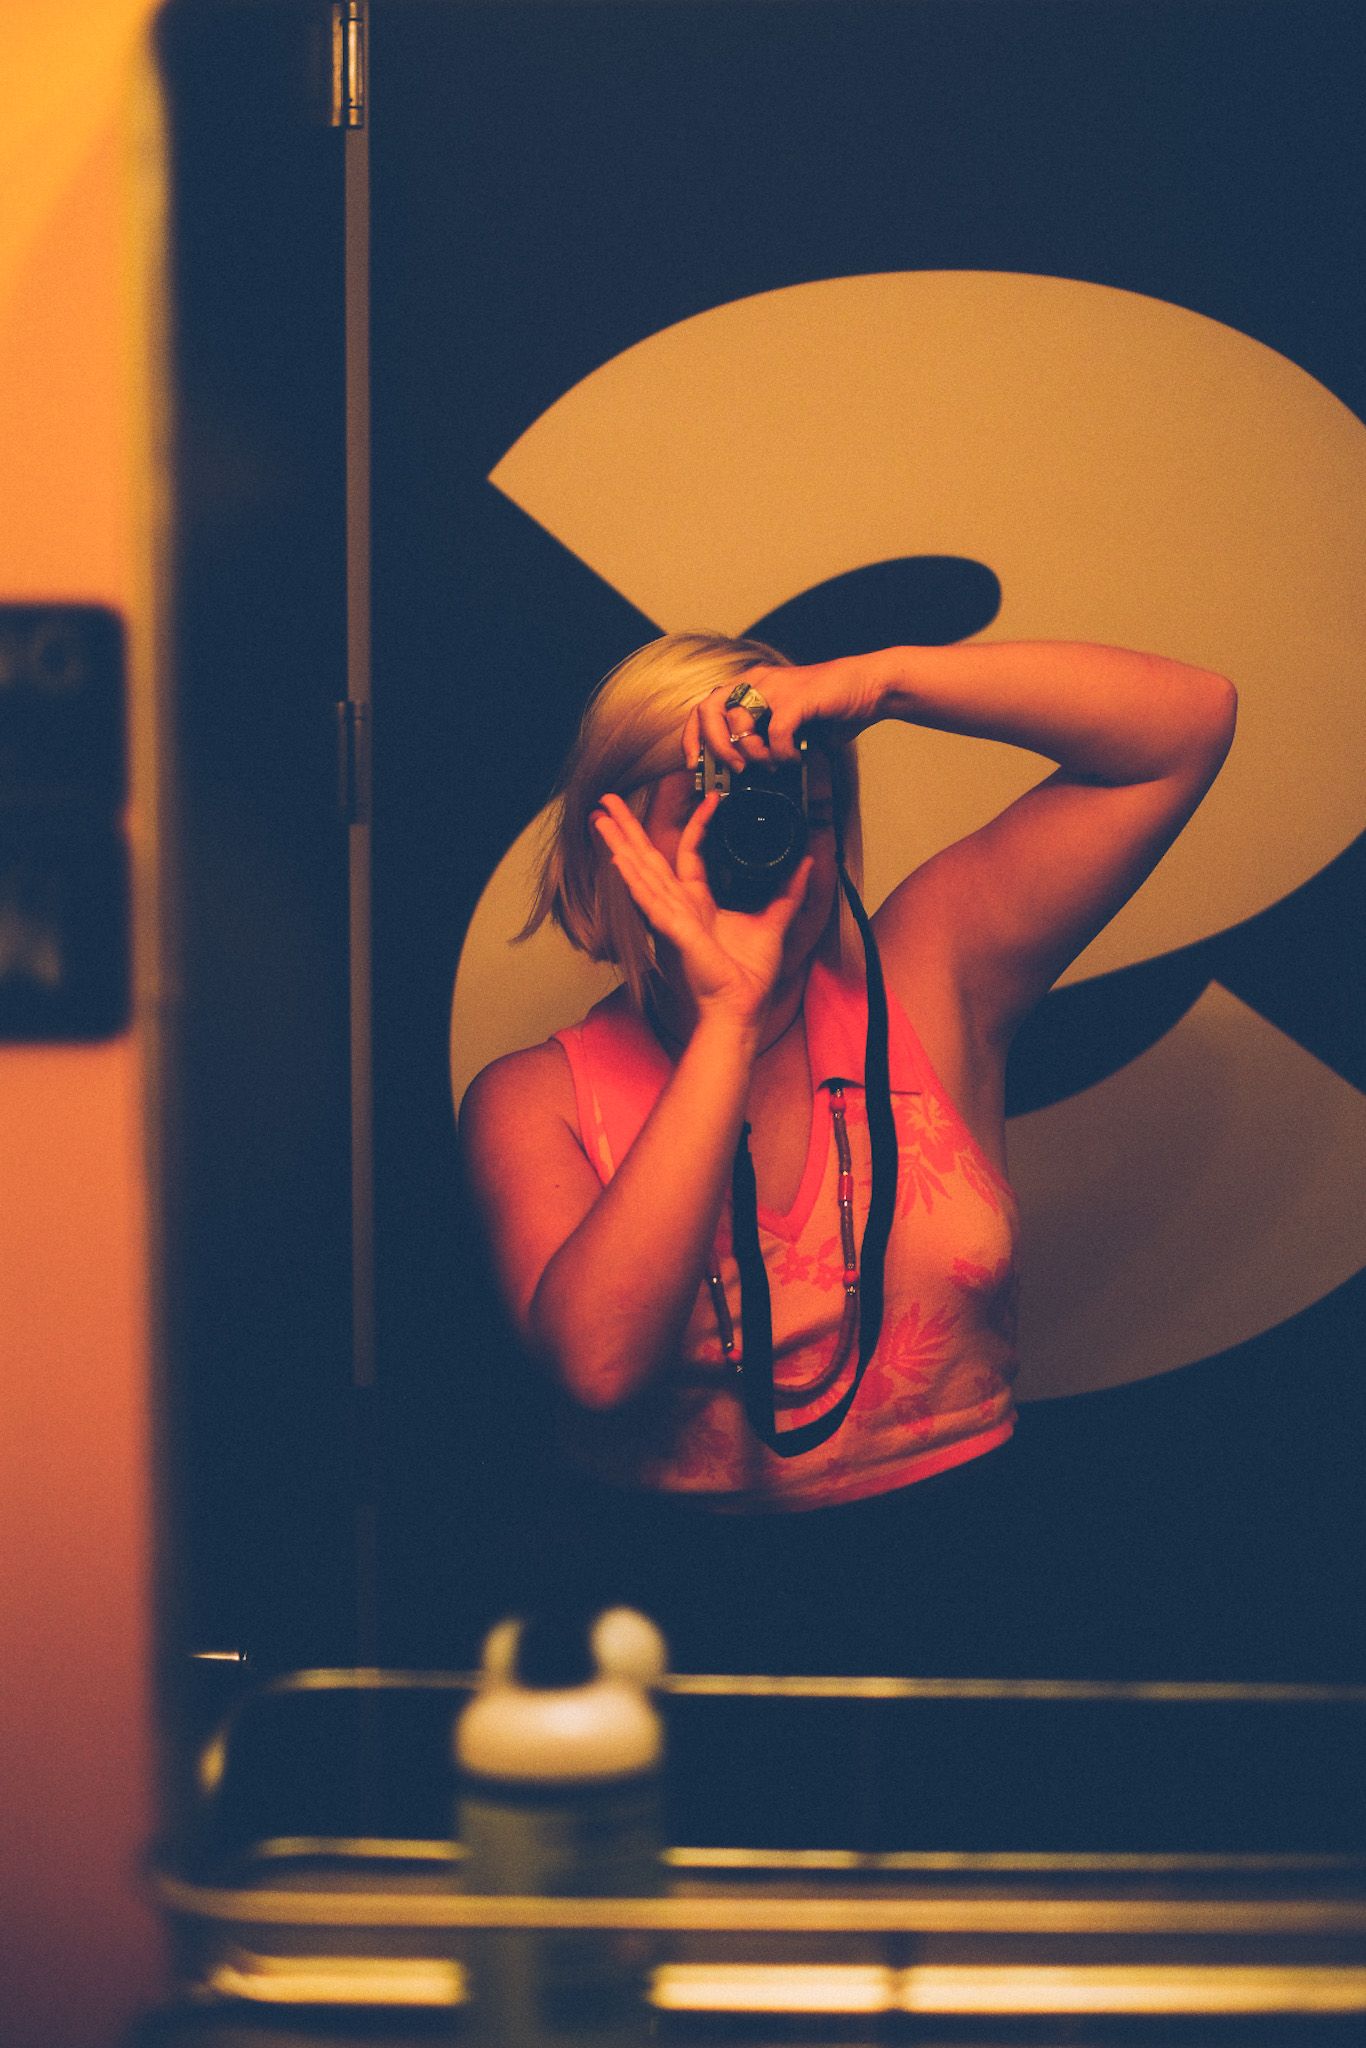 A self-portrait in a bar mirror, the photographer wearing a pink and orange tank top, face hidden by the camera.